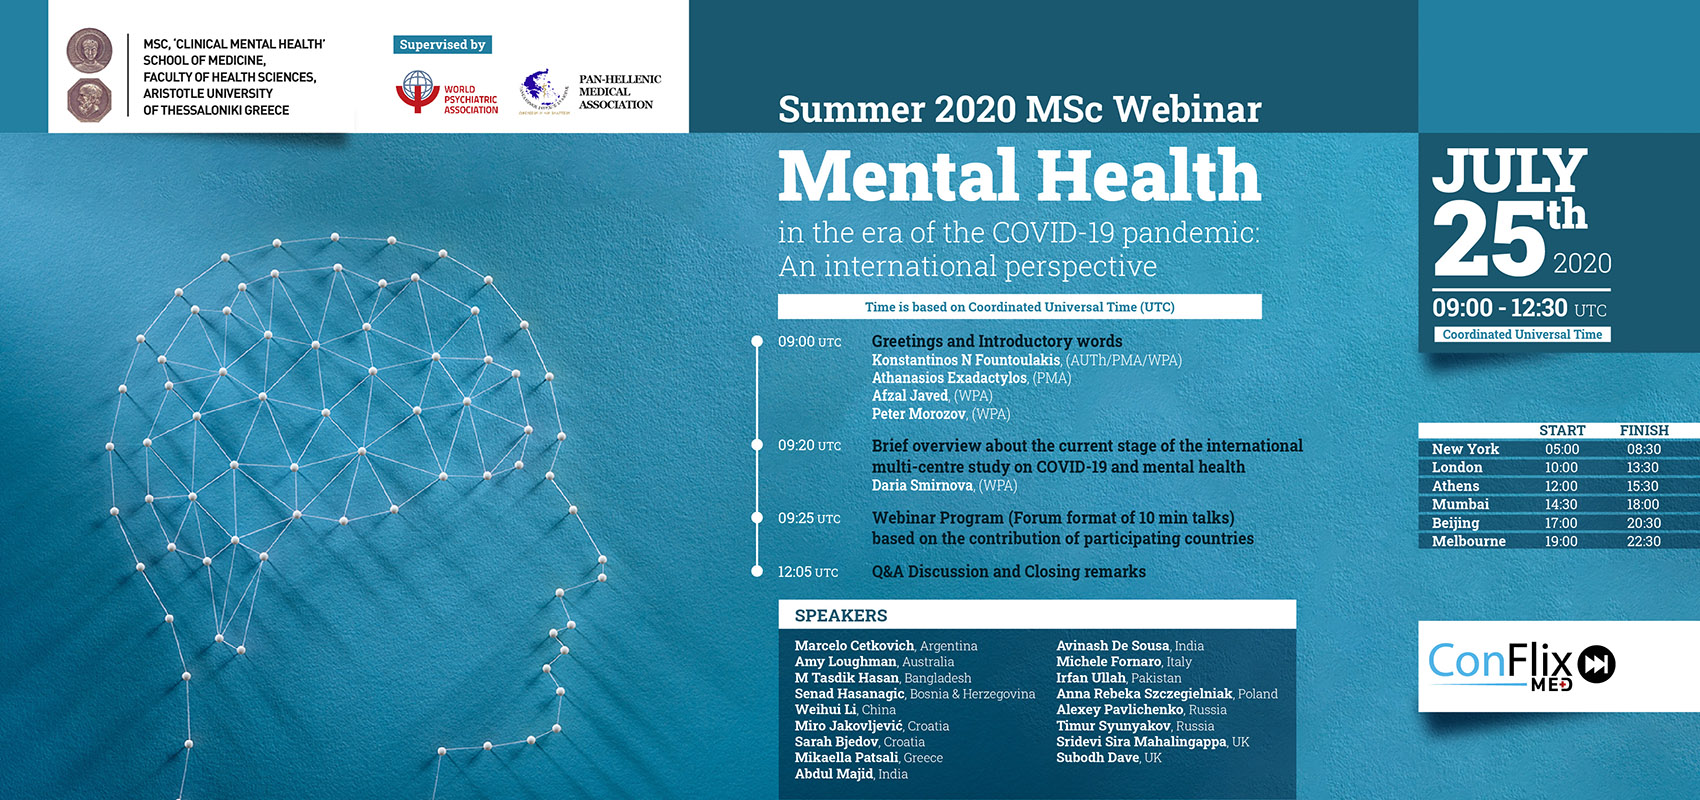 Summer 2020 MSc Webinar - Mental Health in the era of the COVID-19 pandemic: An international perspective